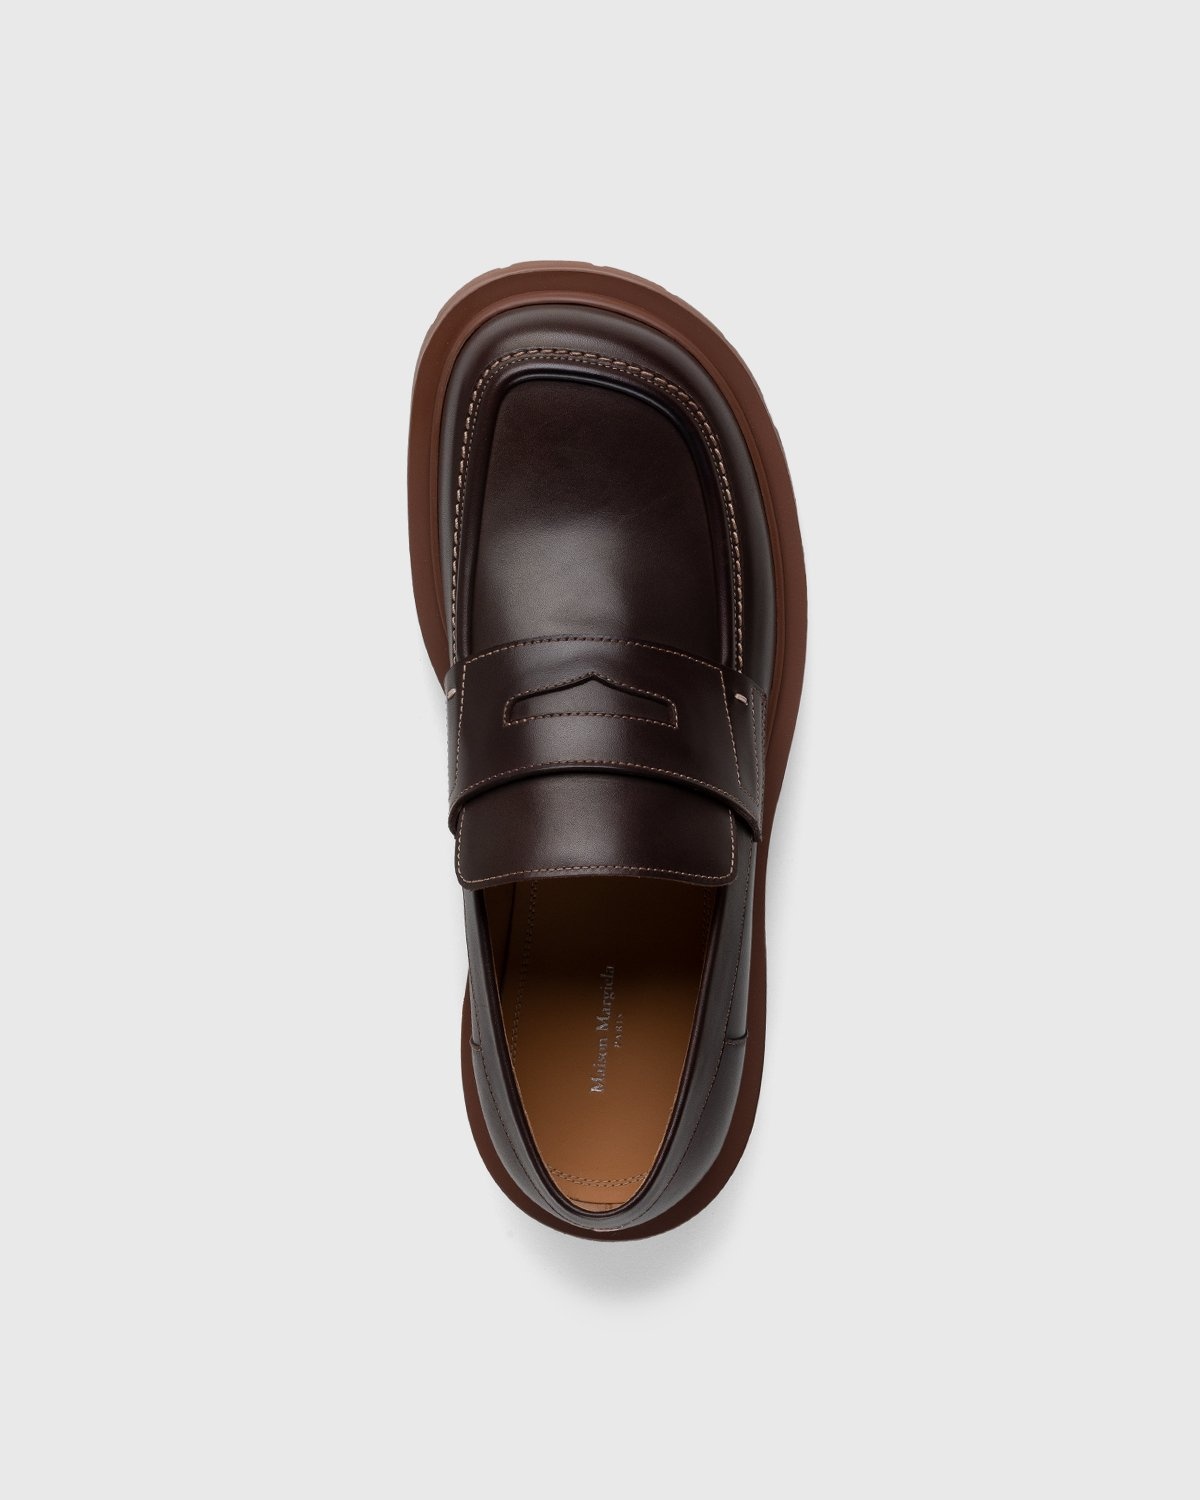 Maison Margiela – Lug Sole Loafers Brown - Shoes - Brown - Image 5